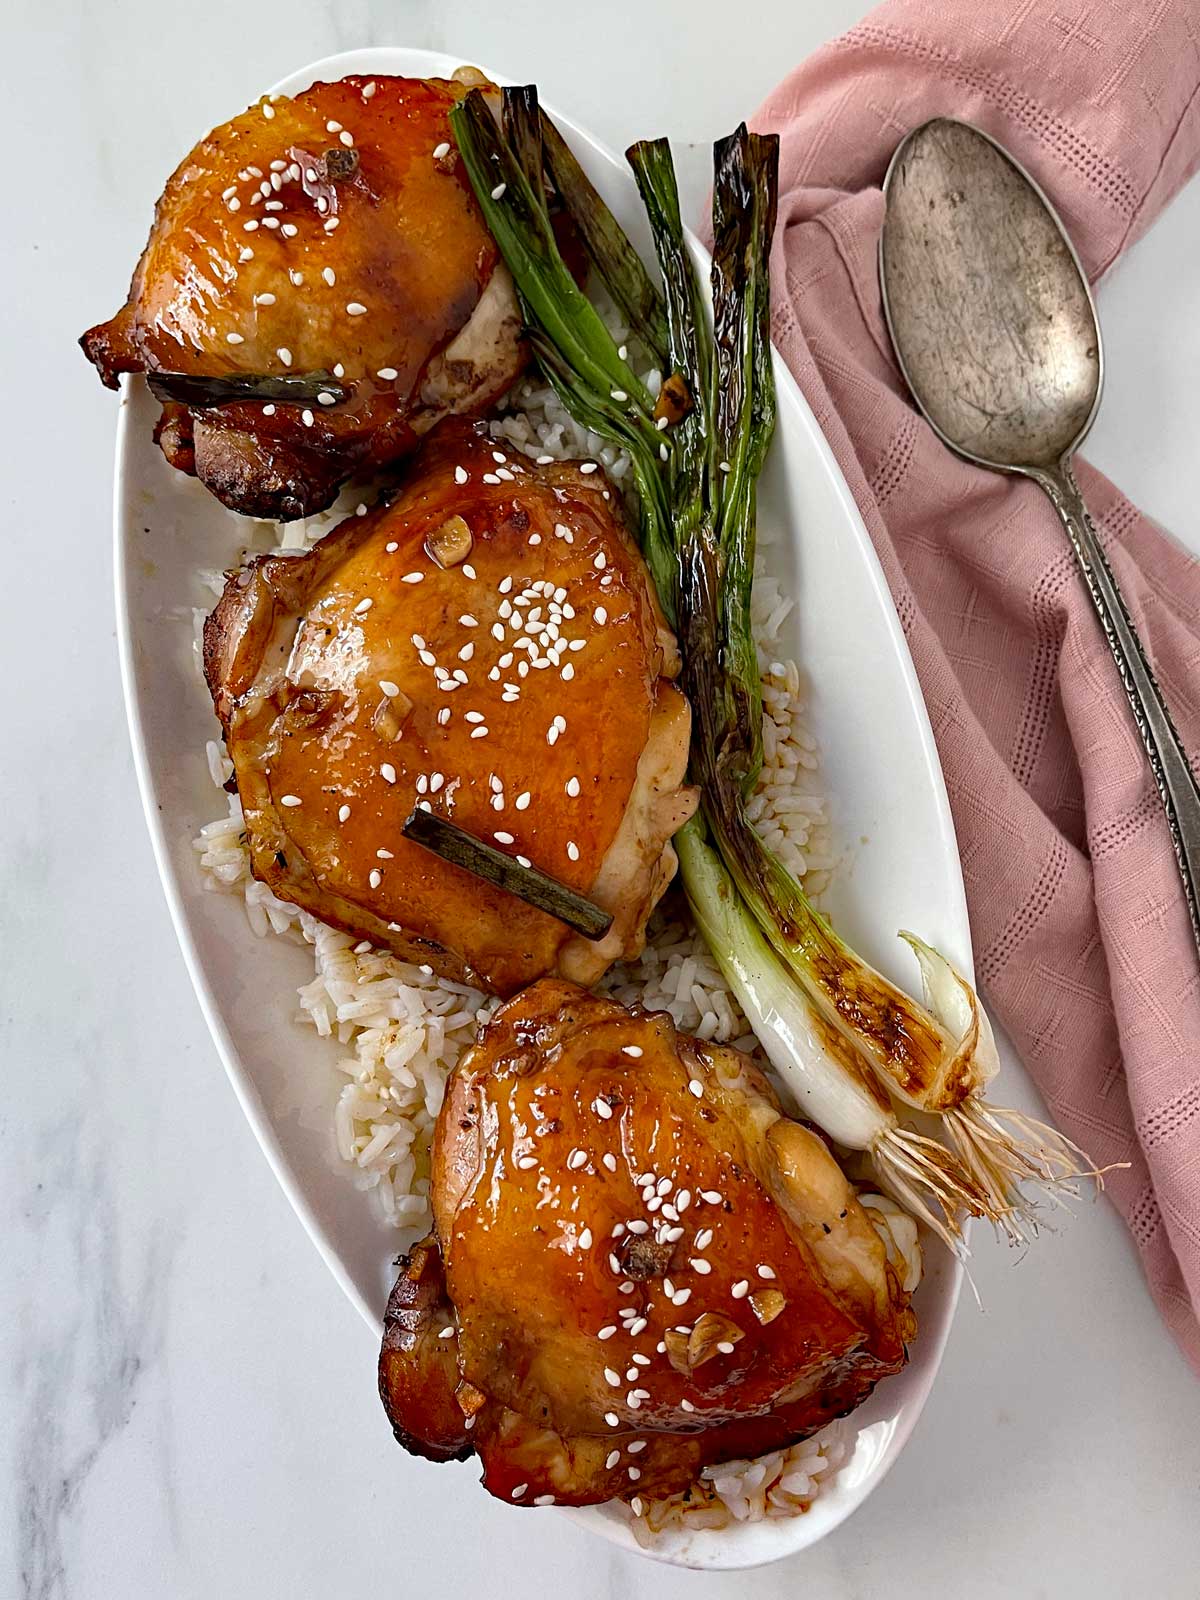 Aloha Shoyu Chicken Recipe served on a white oval platter with rice, pan drippings and grilled green onions.